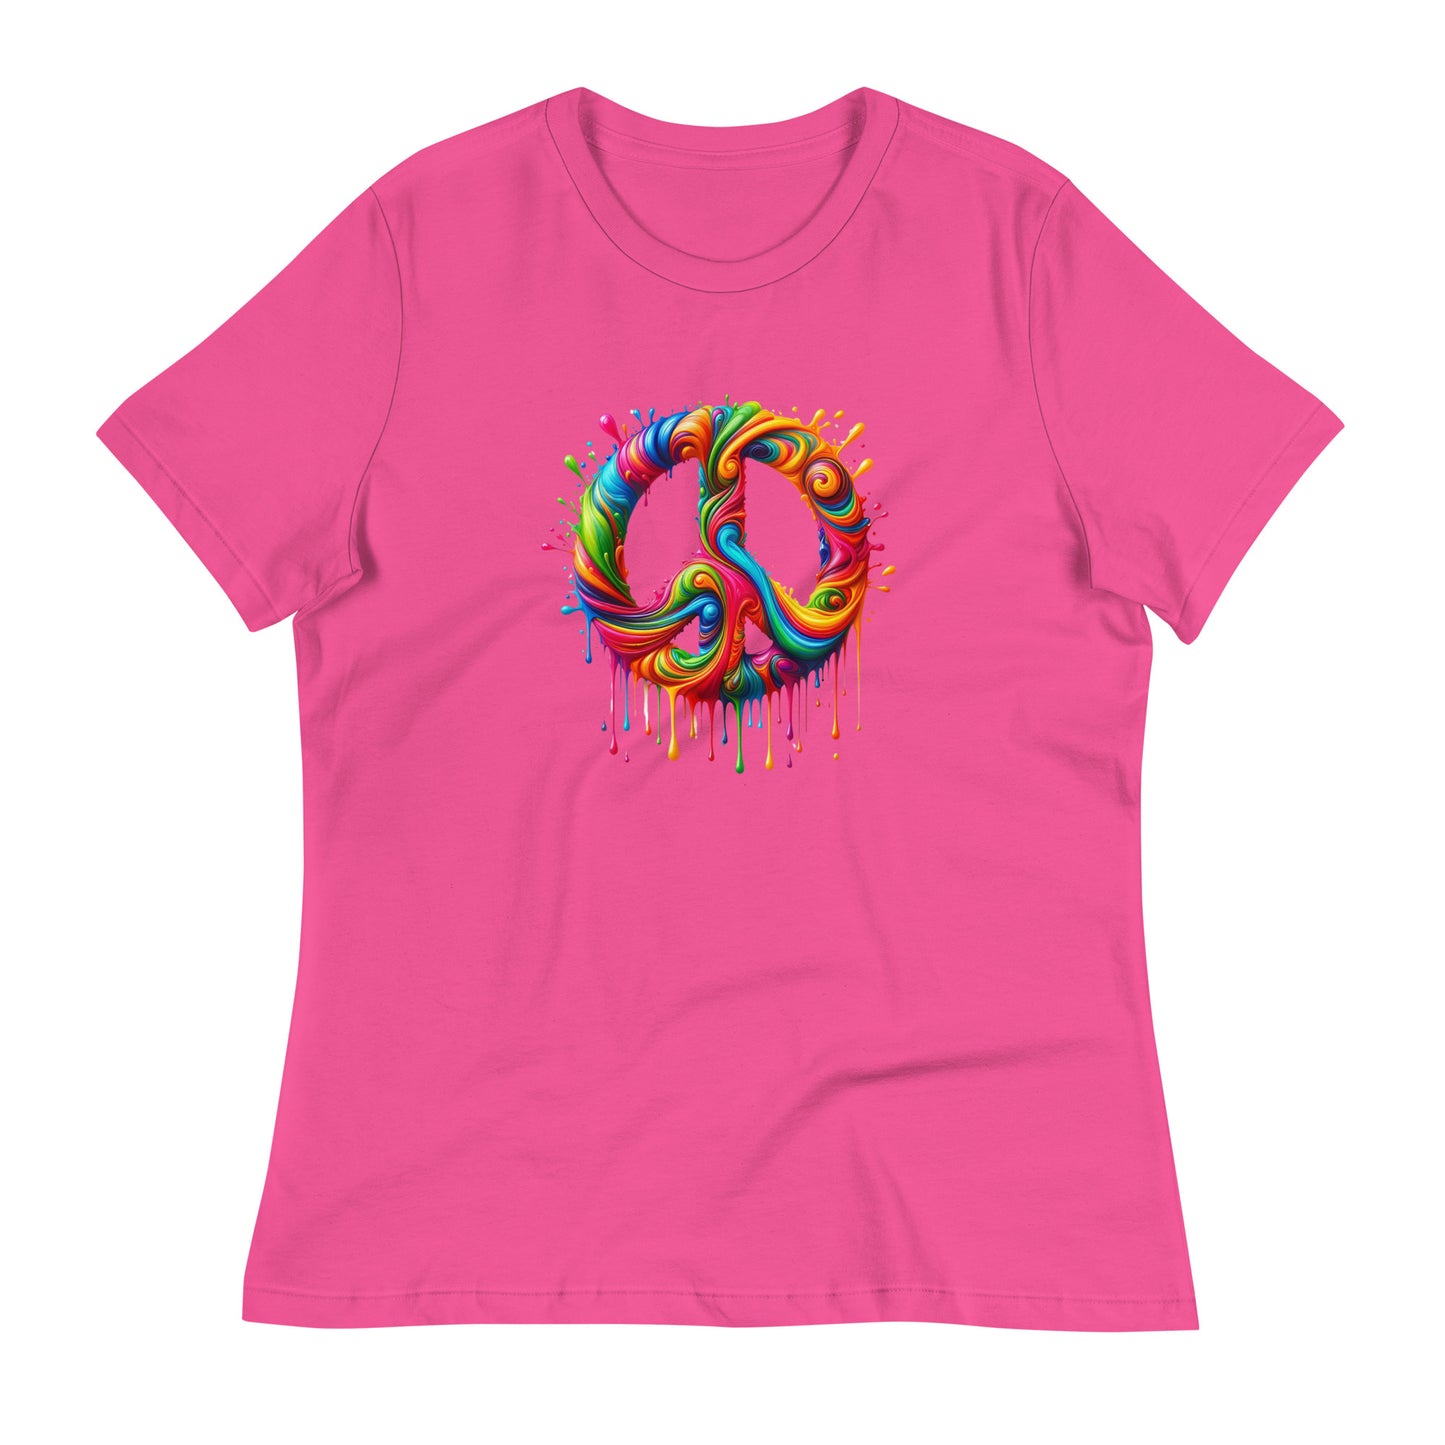 Dripping Colors of Peace Women's T-Shirt